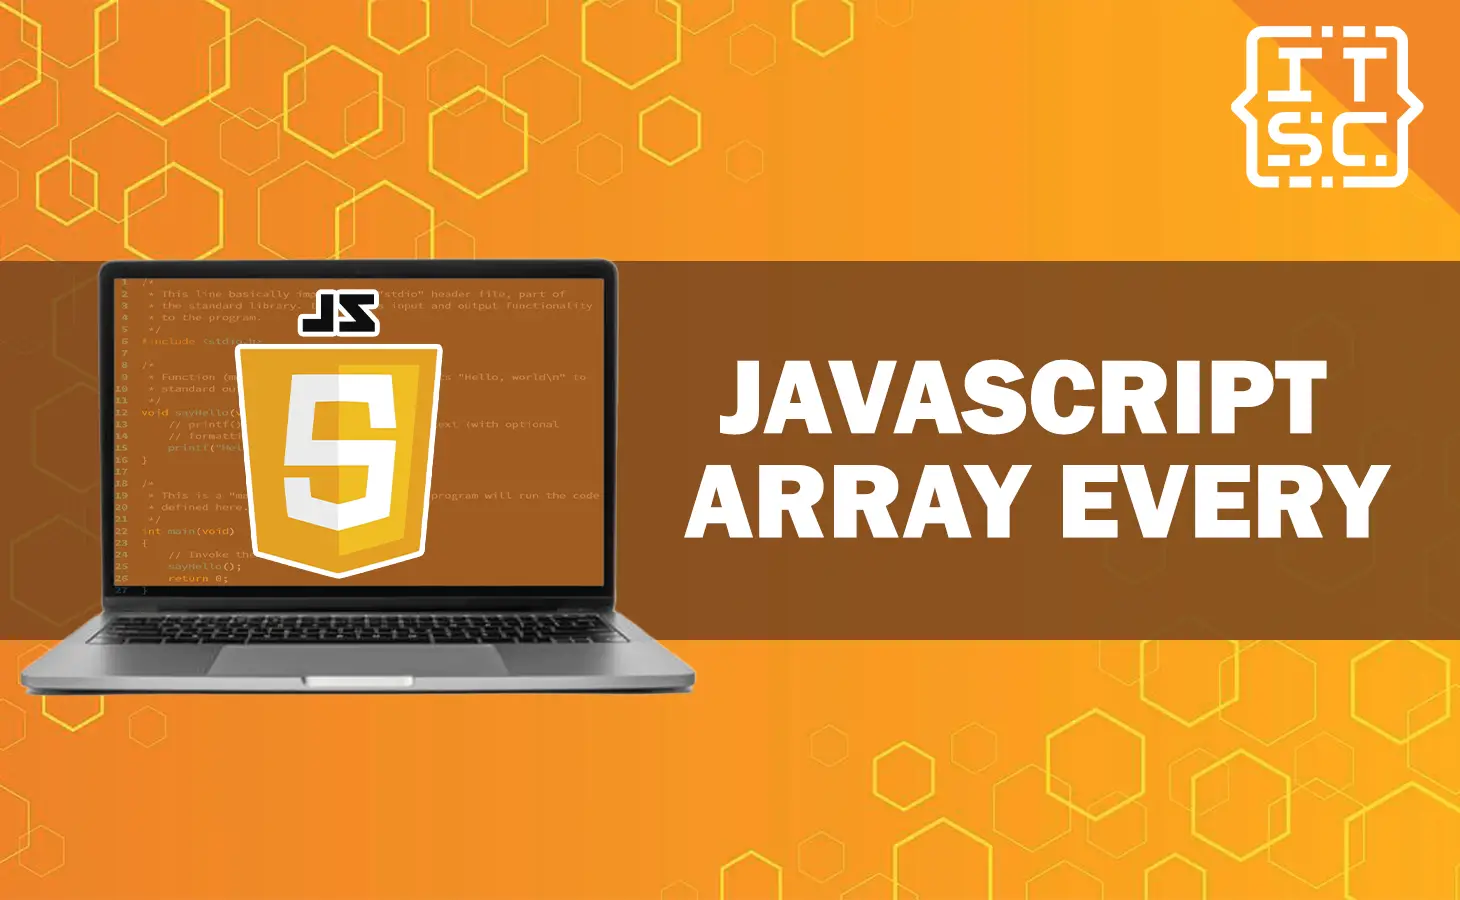 How to use the JavaScript array every() Method?